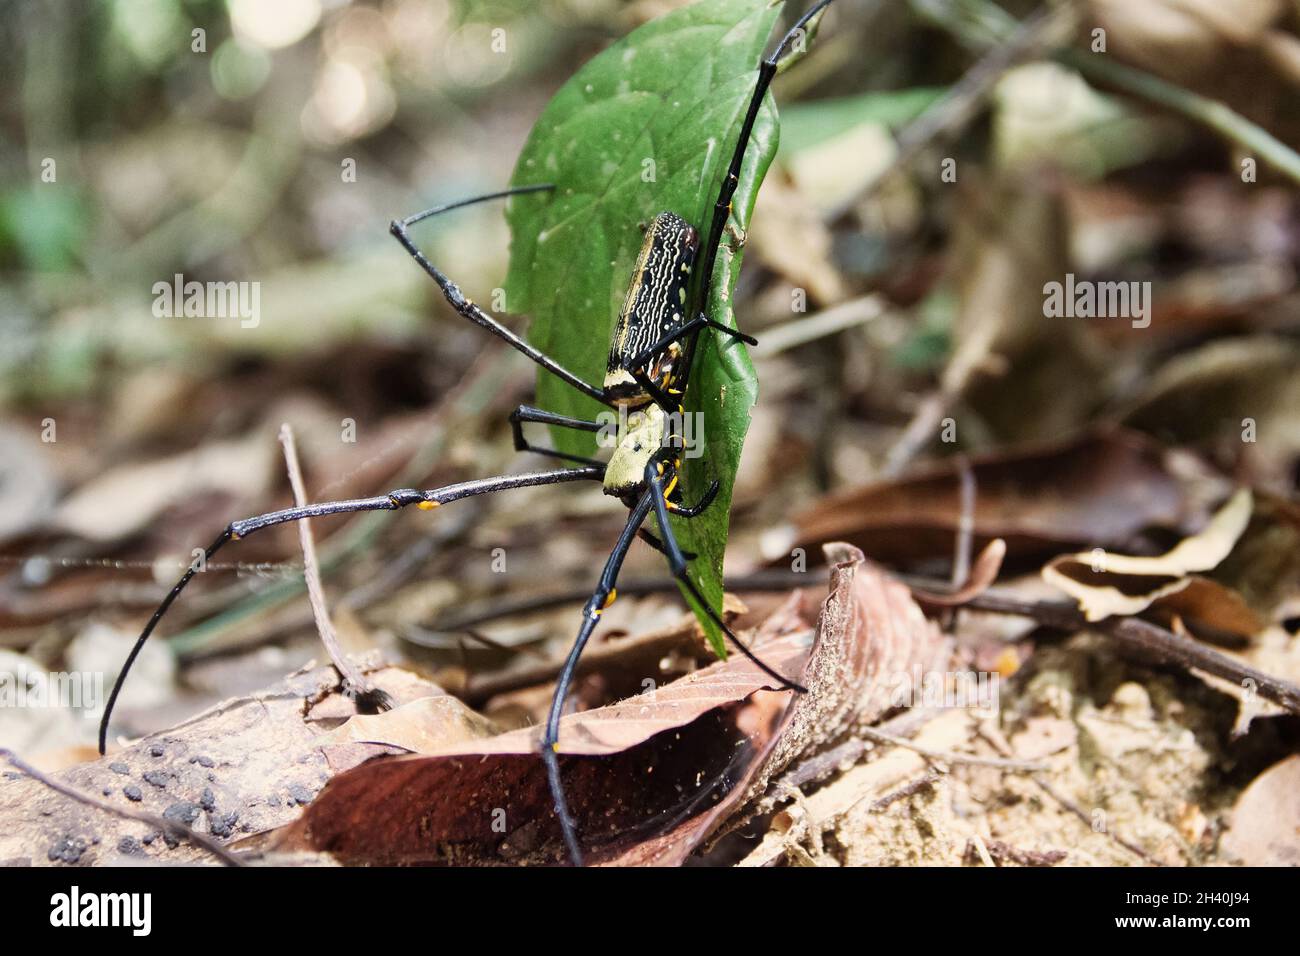 Large spider sits on a web in a rainforest Stock Photo